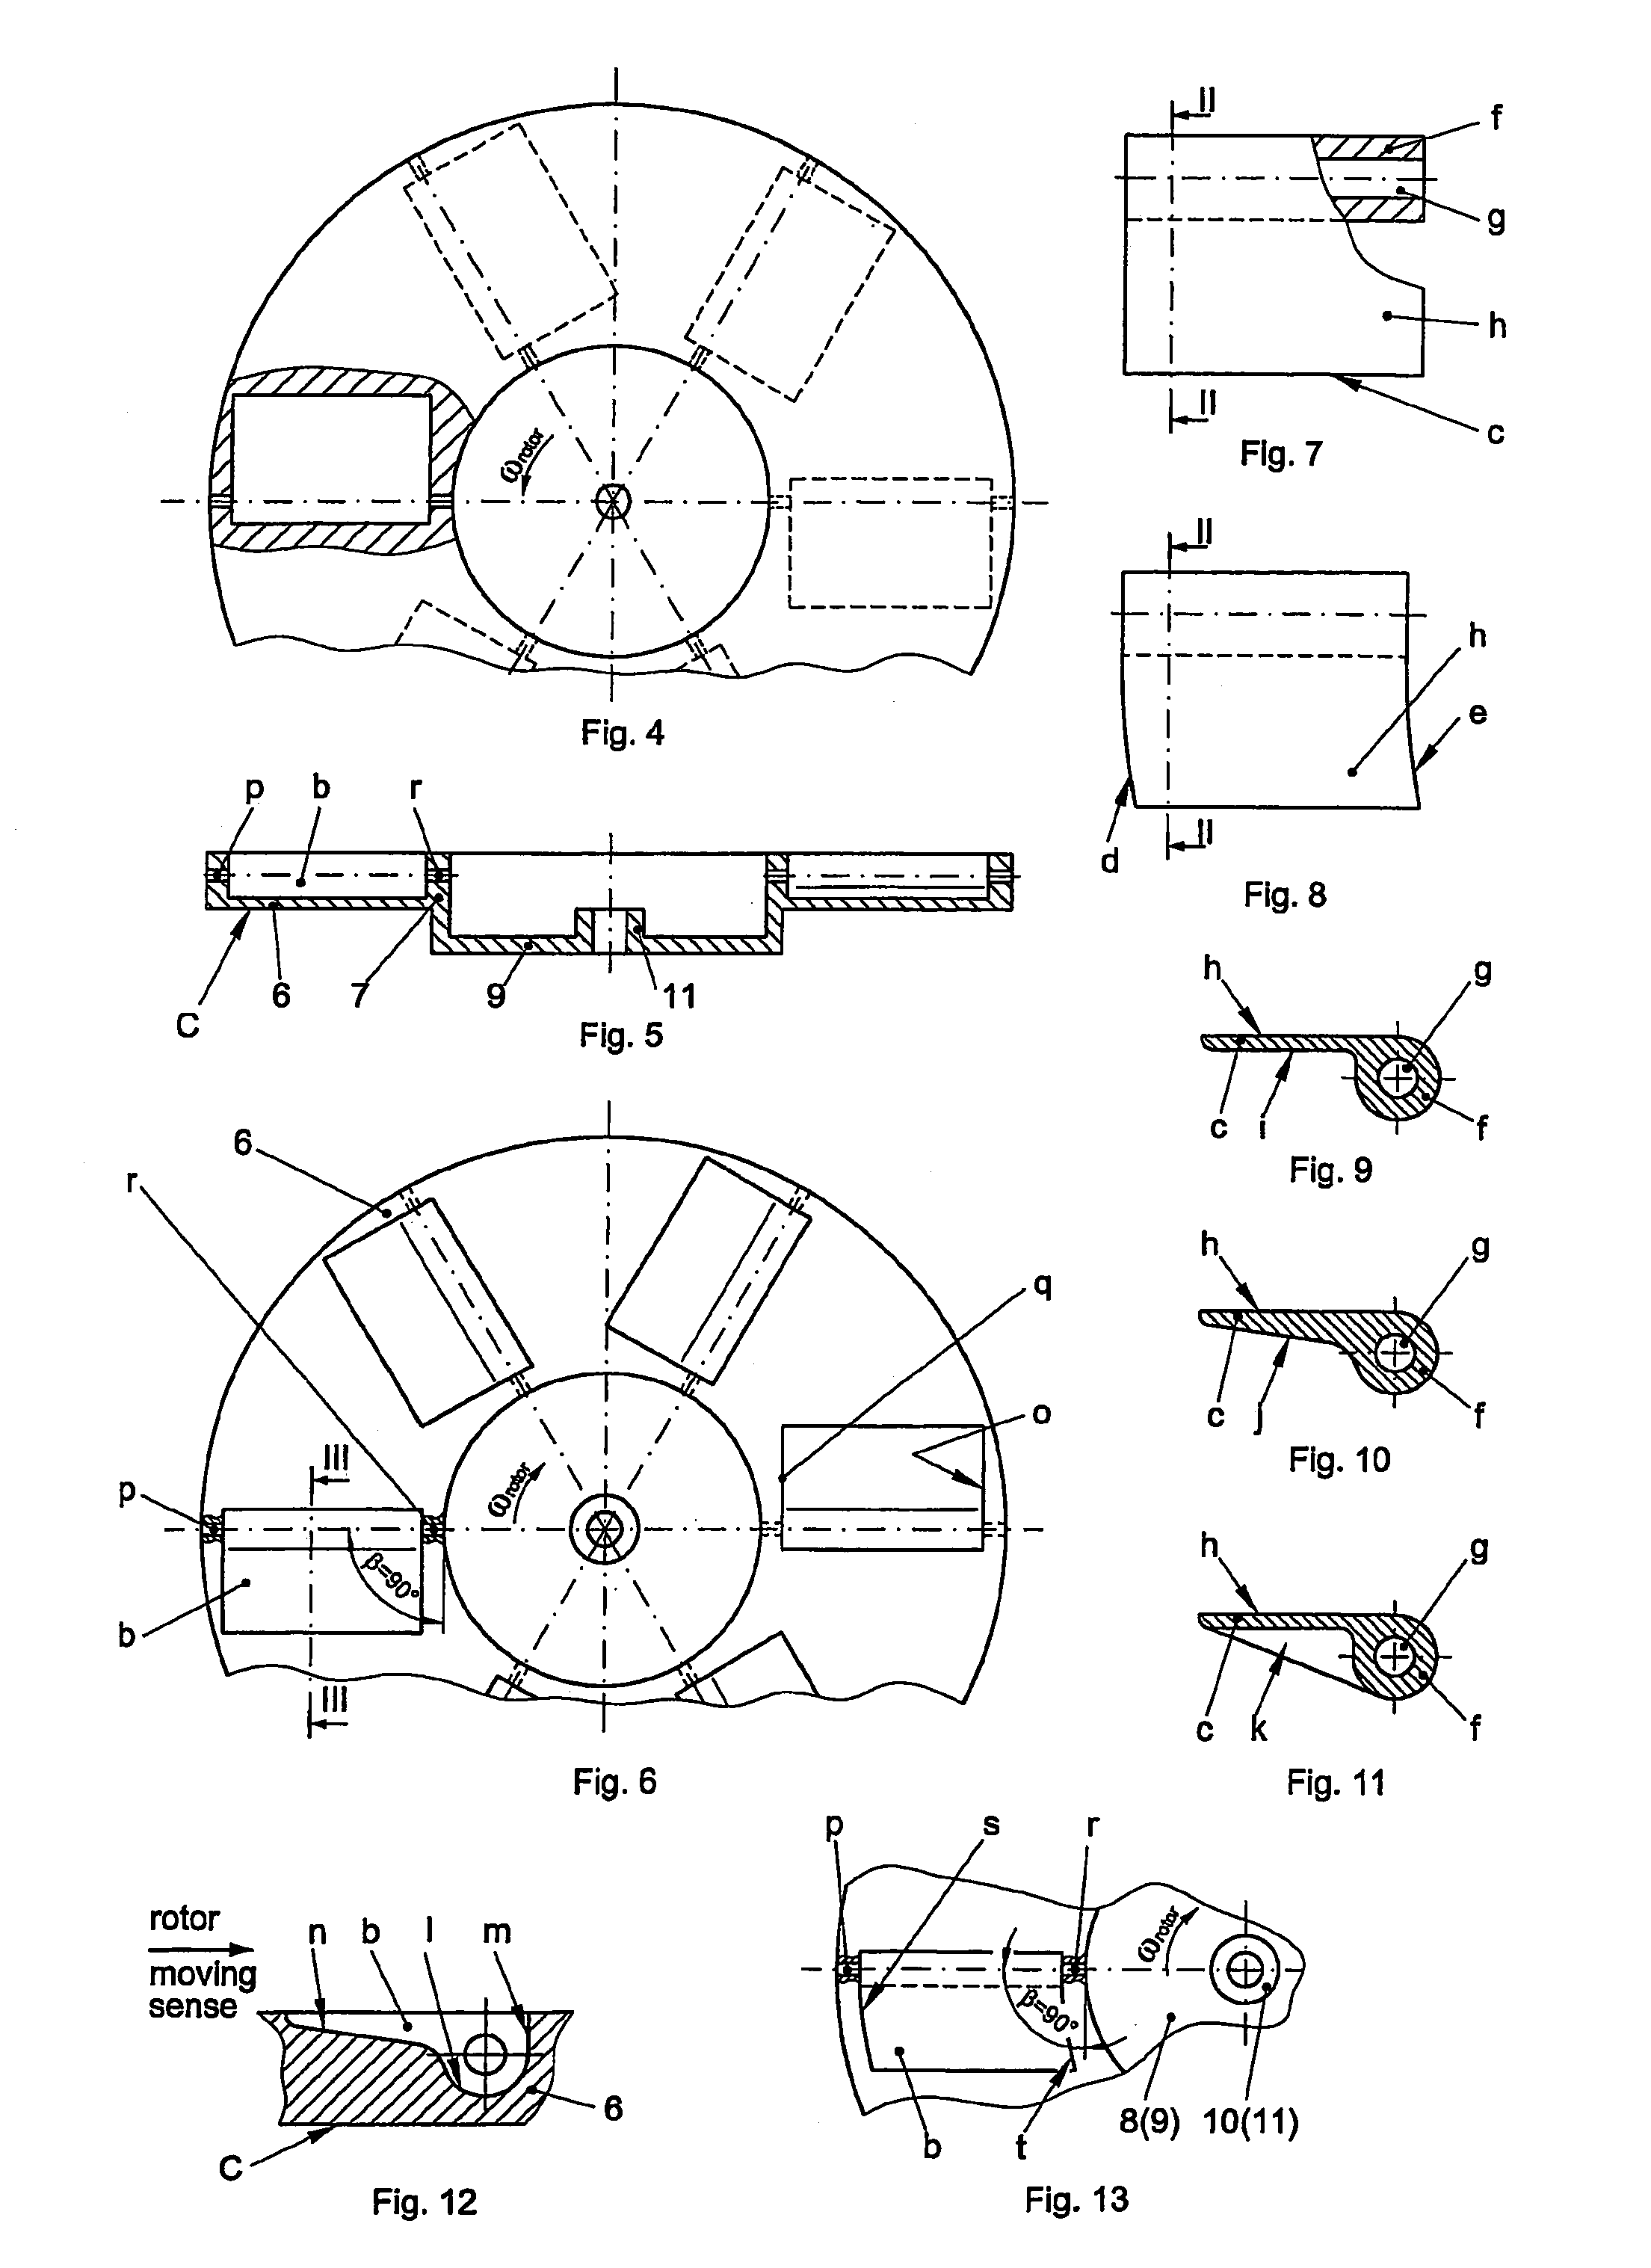 Hydraulic or pneumatic machine with tilting blades